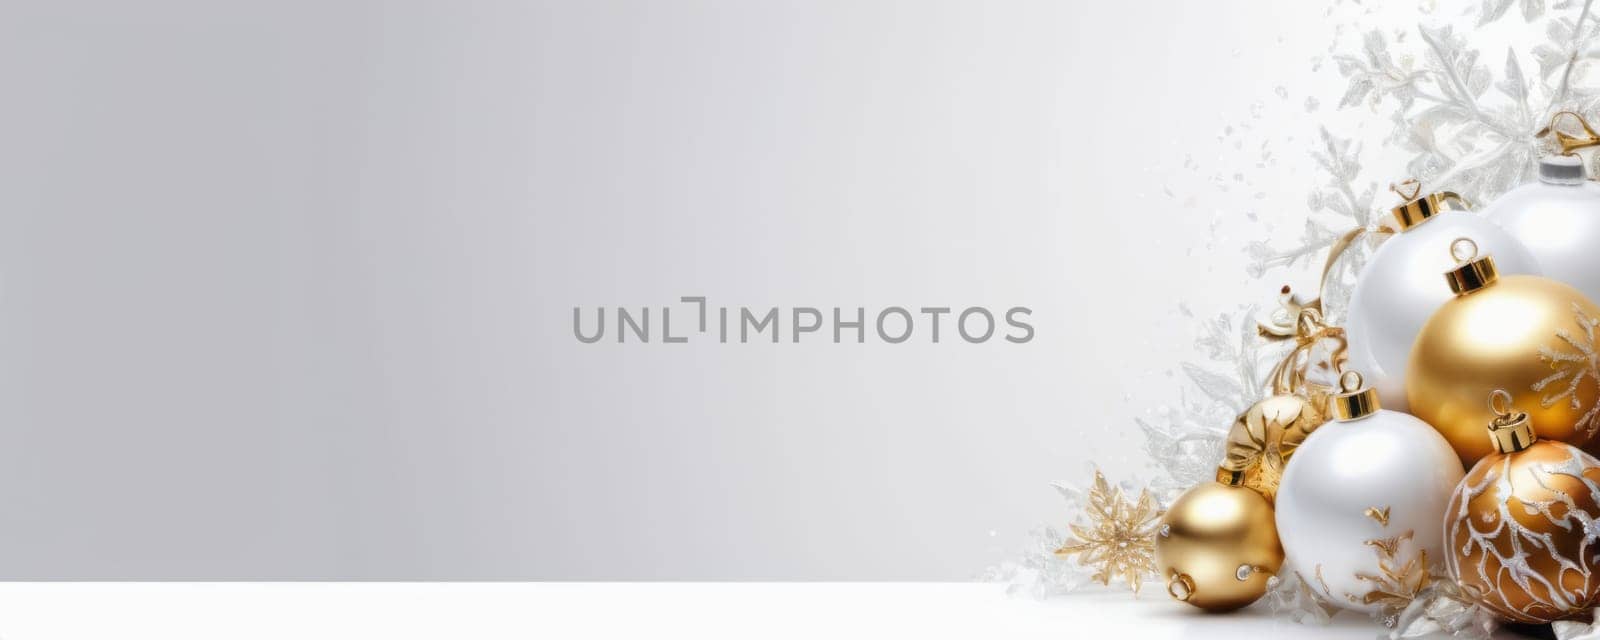 A collection of glossy Christmas ornaments in gold and white, adorned with intricate details, set against a gradient gray backdrop with golden foliage accents